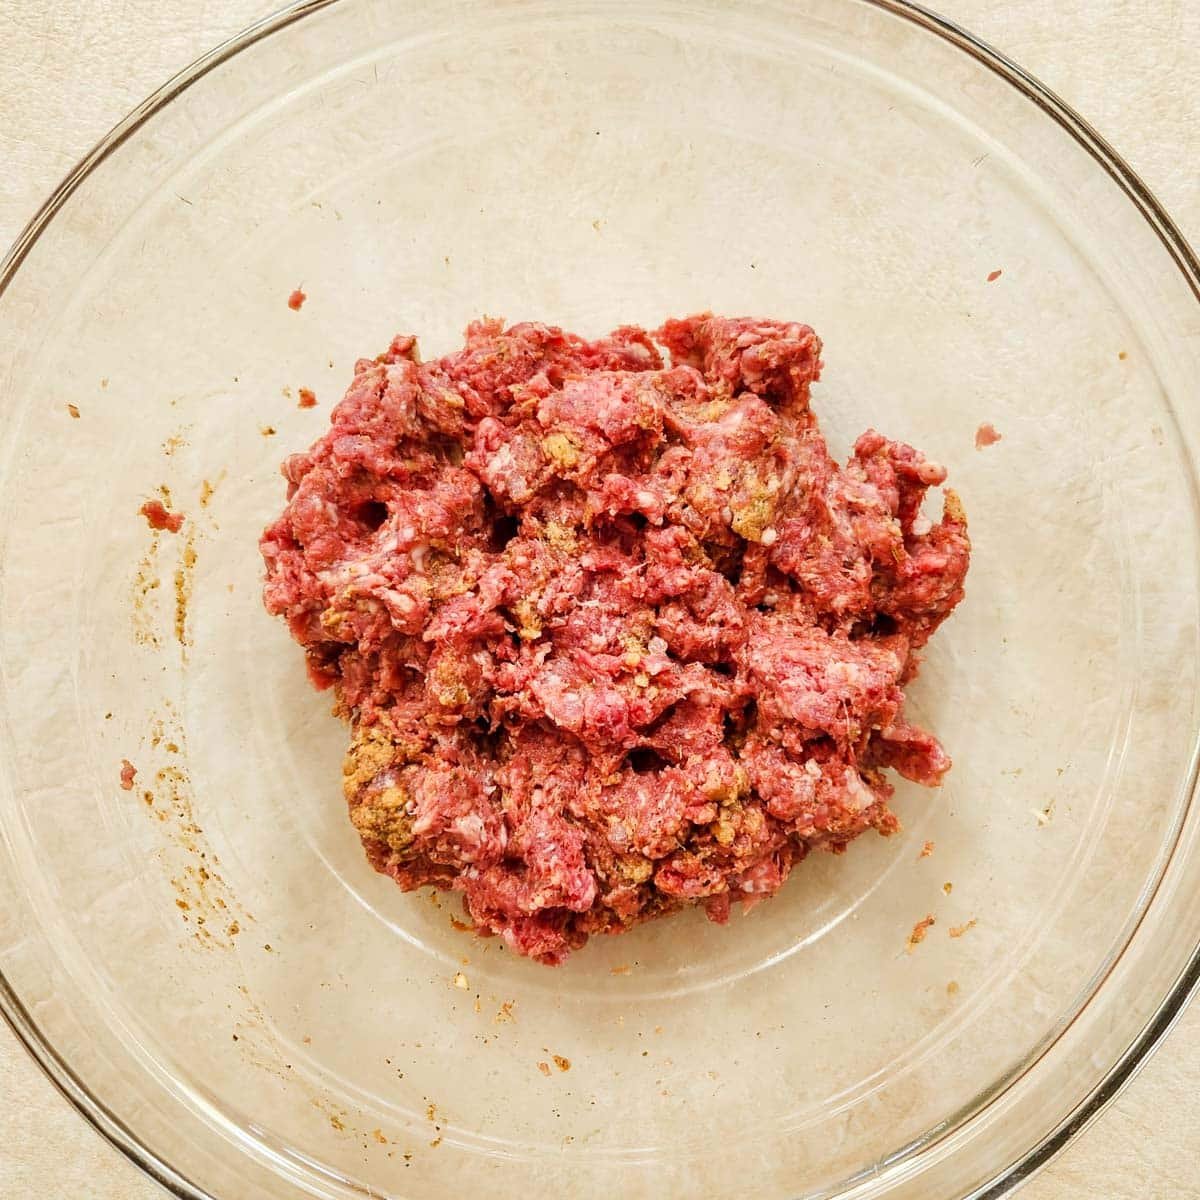 pizza burger mixture with ground beef and Italian sausage